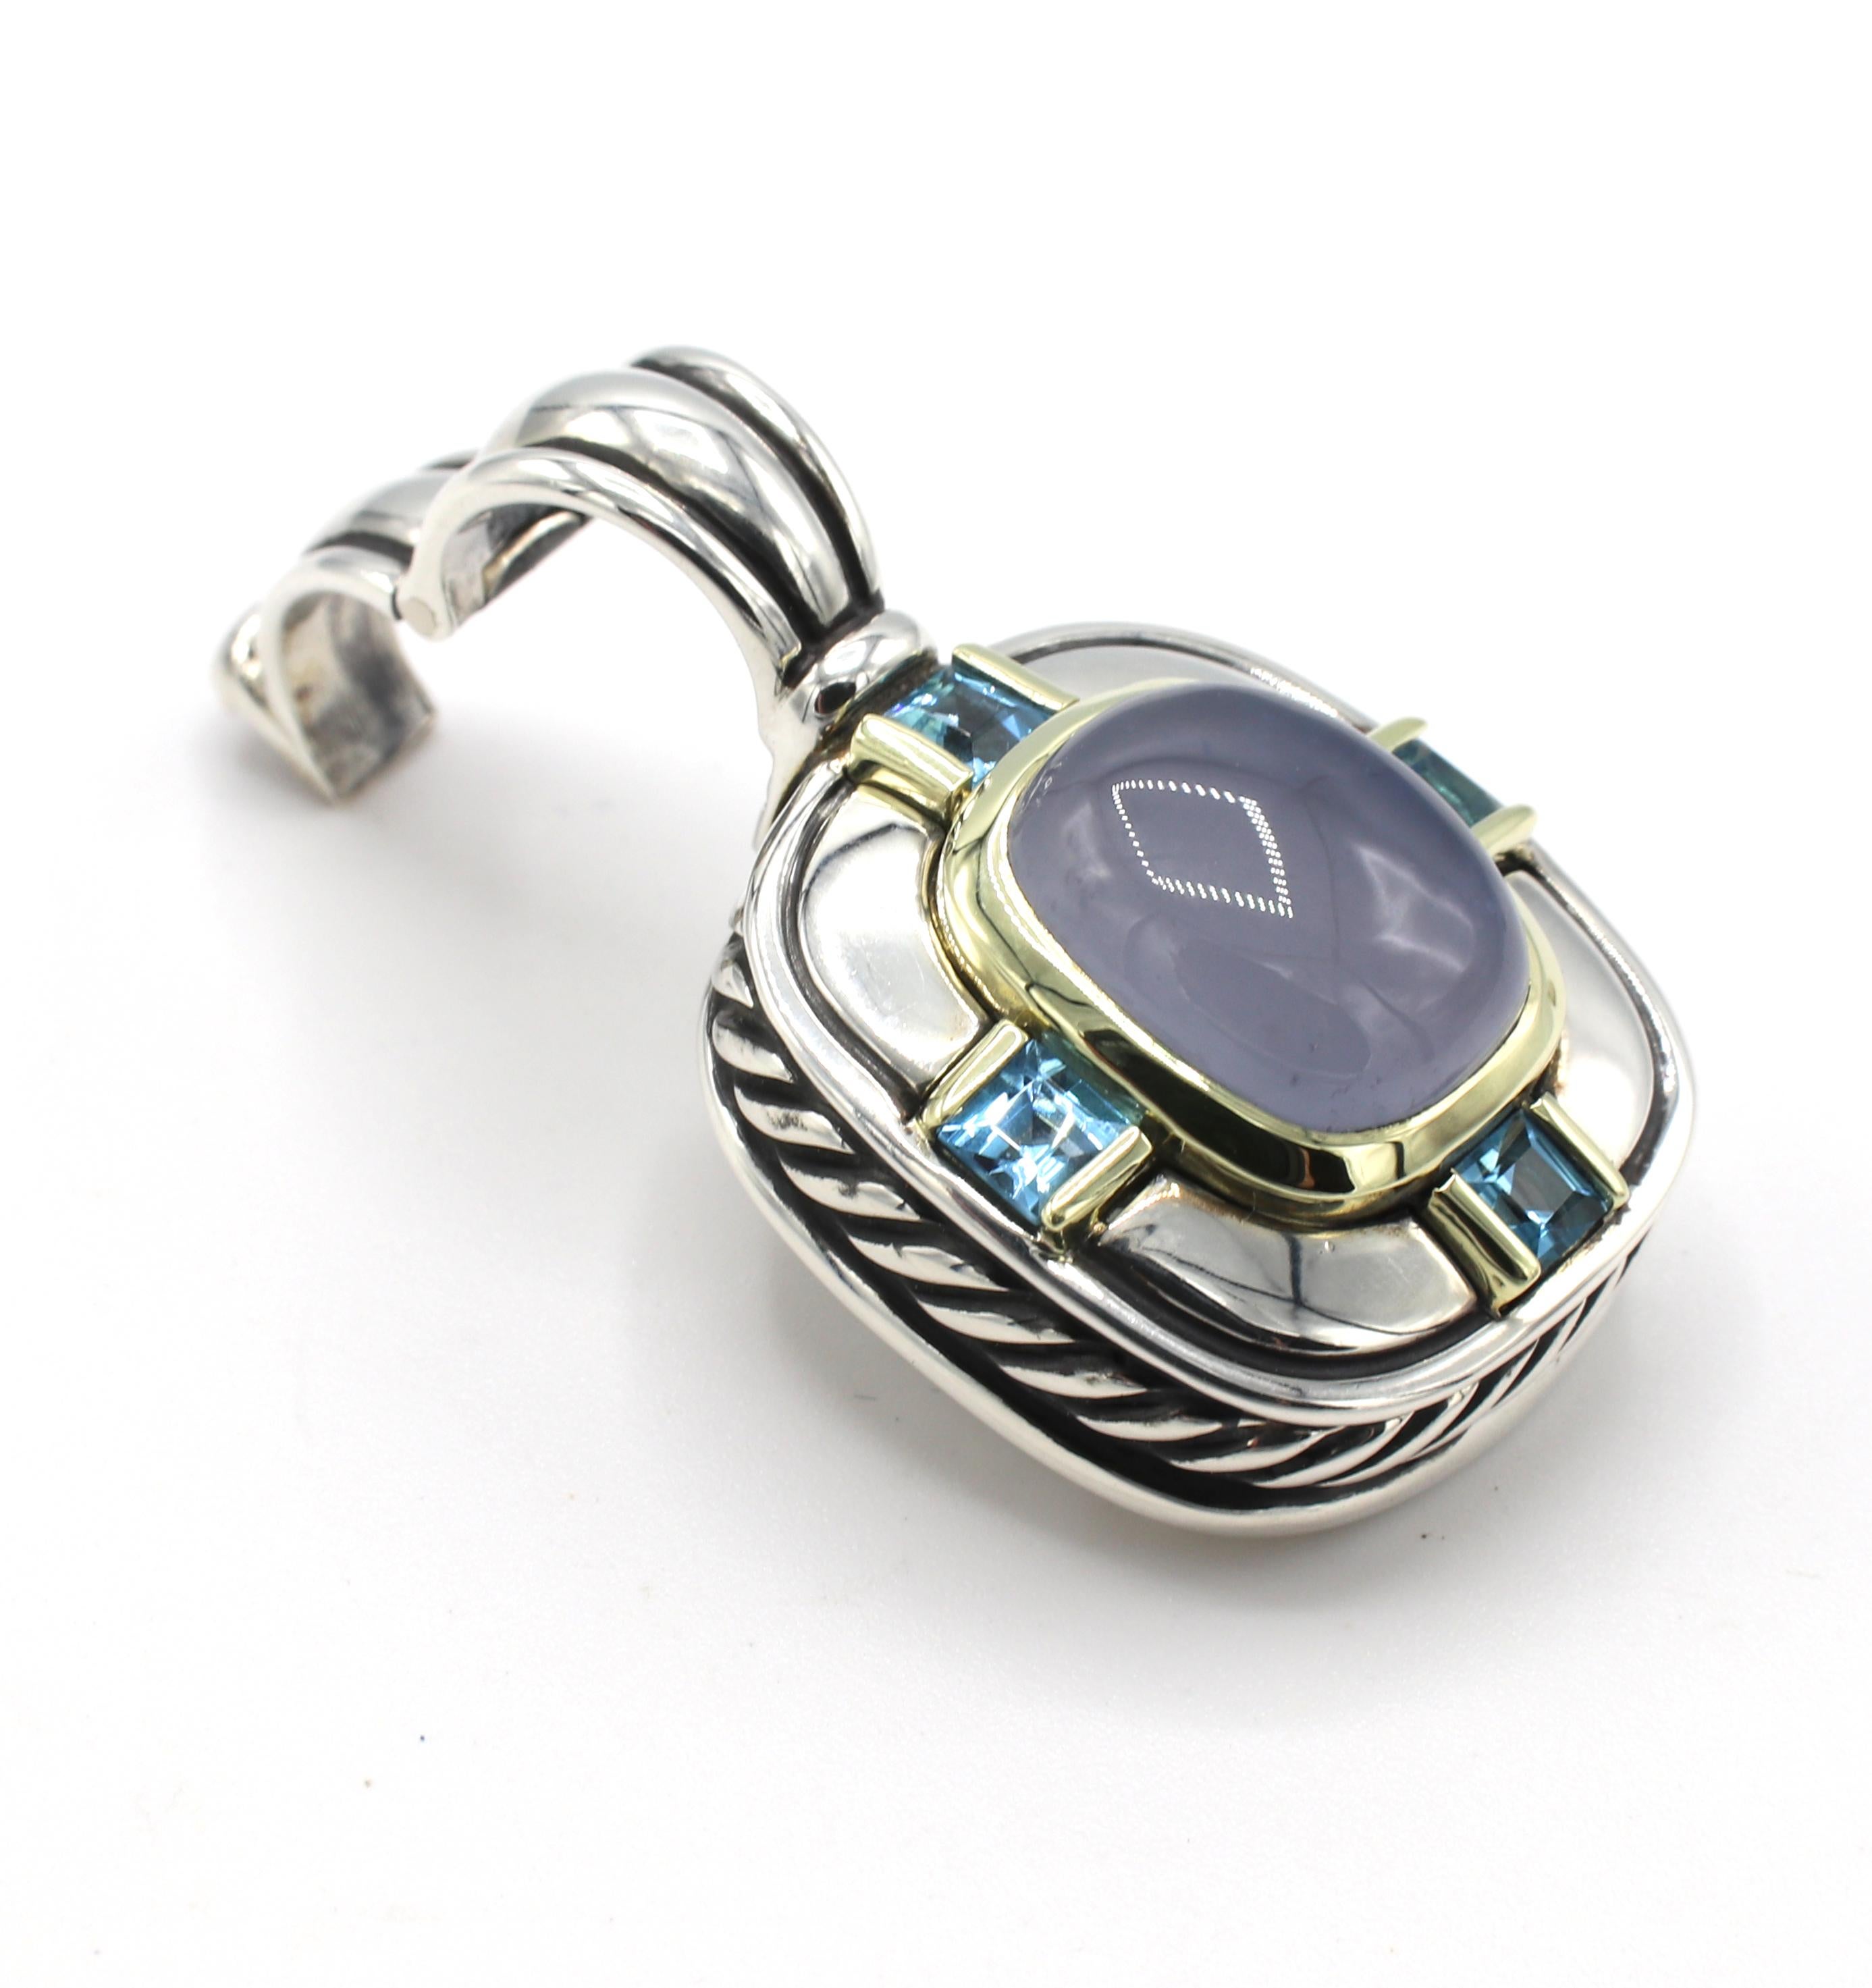 David Yurman Albion Chalcedony & Blue Topaz Silver & Gold Enhancer Pendant
Metal: Sterling silver & 14k yellow gold
Weight: 12.55 grams
Length: 33.5mm
Width: 20mm
Note: Pendant/Enhancer only, does not include chain